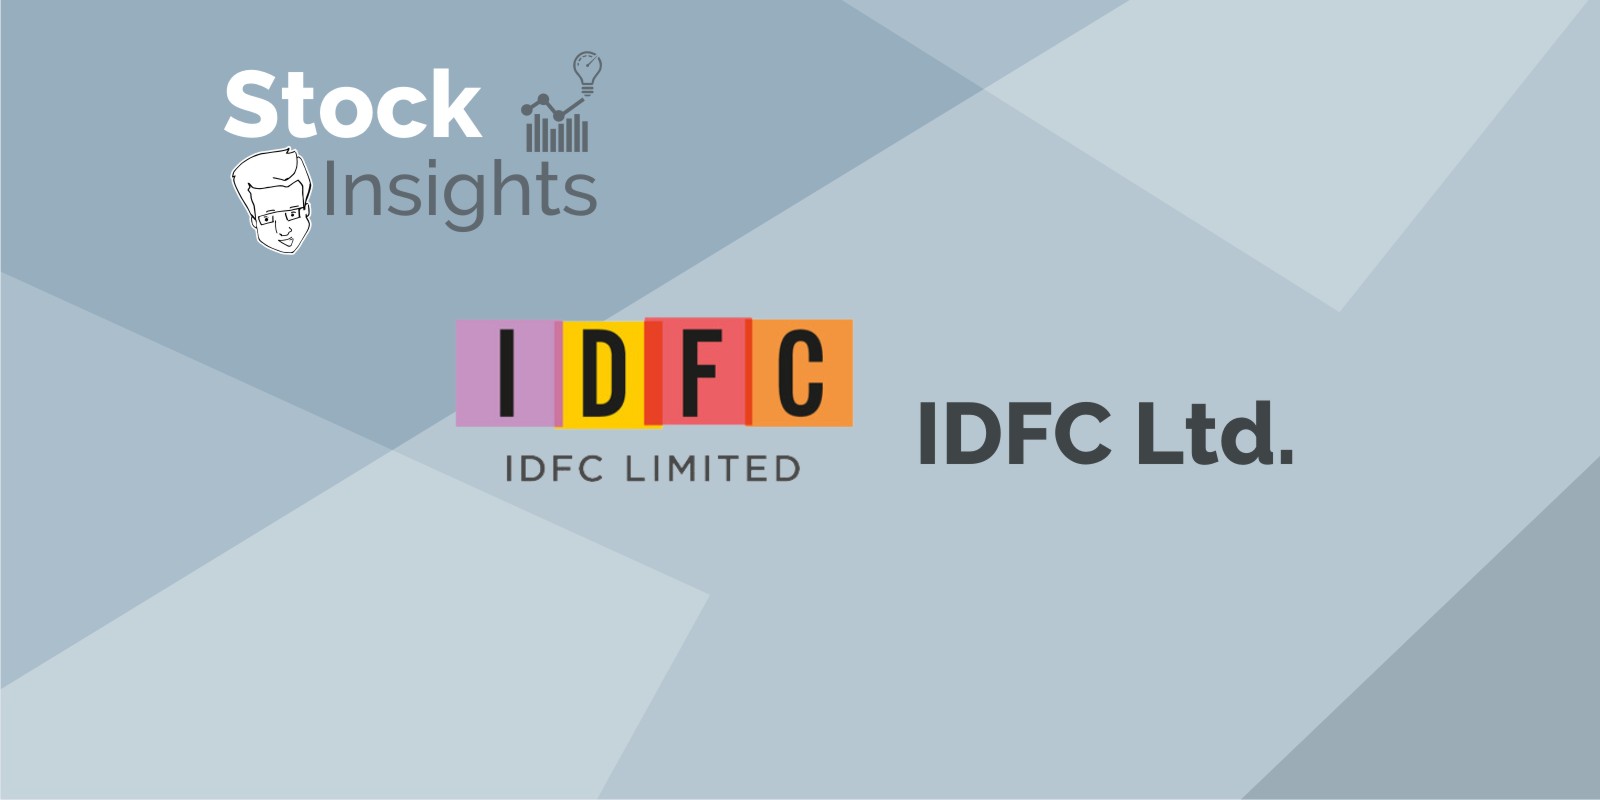 IDFC Bank-Capital First Merger: Capital First Expects Merger With IDFC Bank  To Be Completed In Few Months